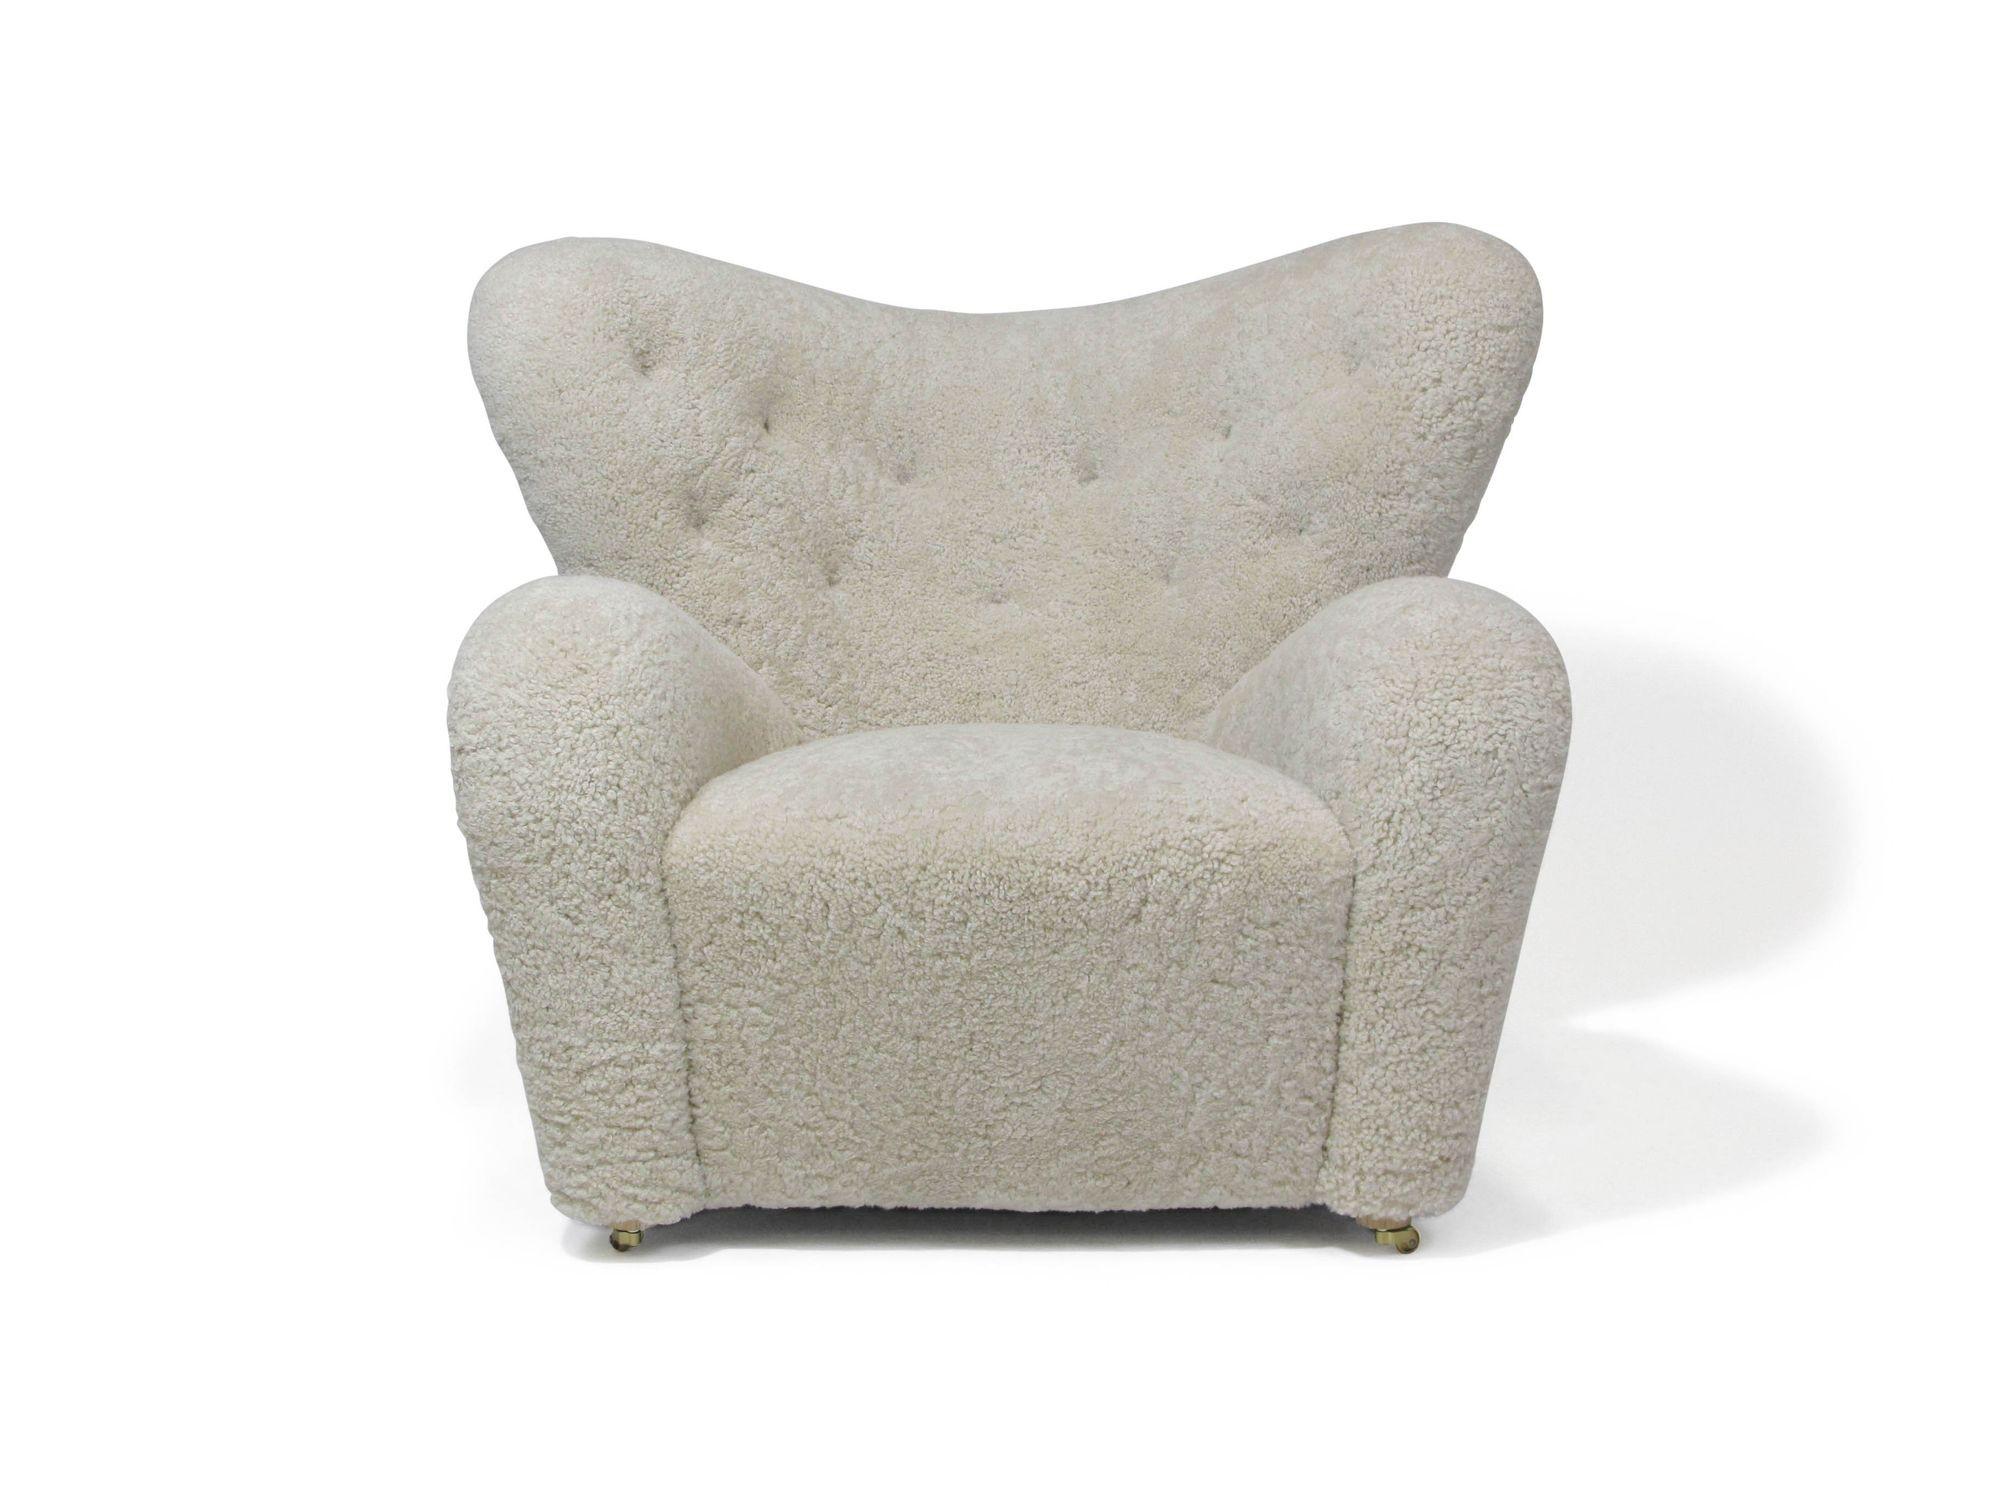 Tired Man lounge chair and ottoman designed by Flemming Lassen for the Copenhagen Cabinetmakers Guild Exhibition of 1935. This large, sculpted form lounge chair is a danish modern classic, fully upholstered in natural shearling with button tufted